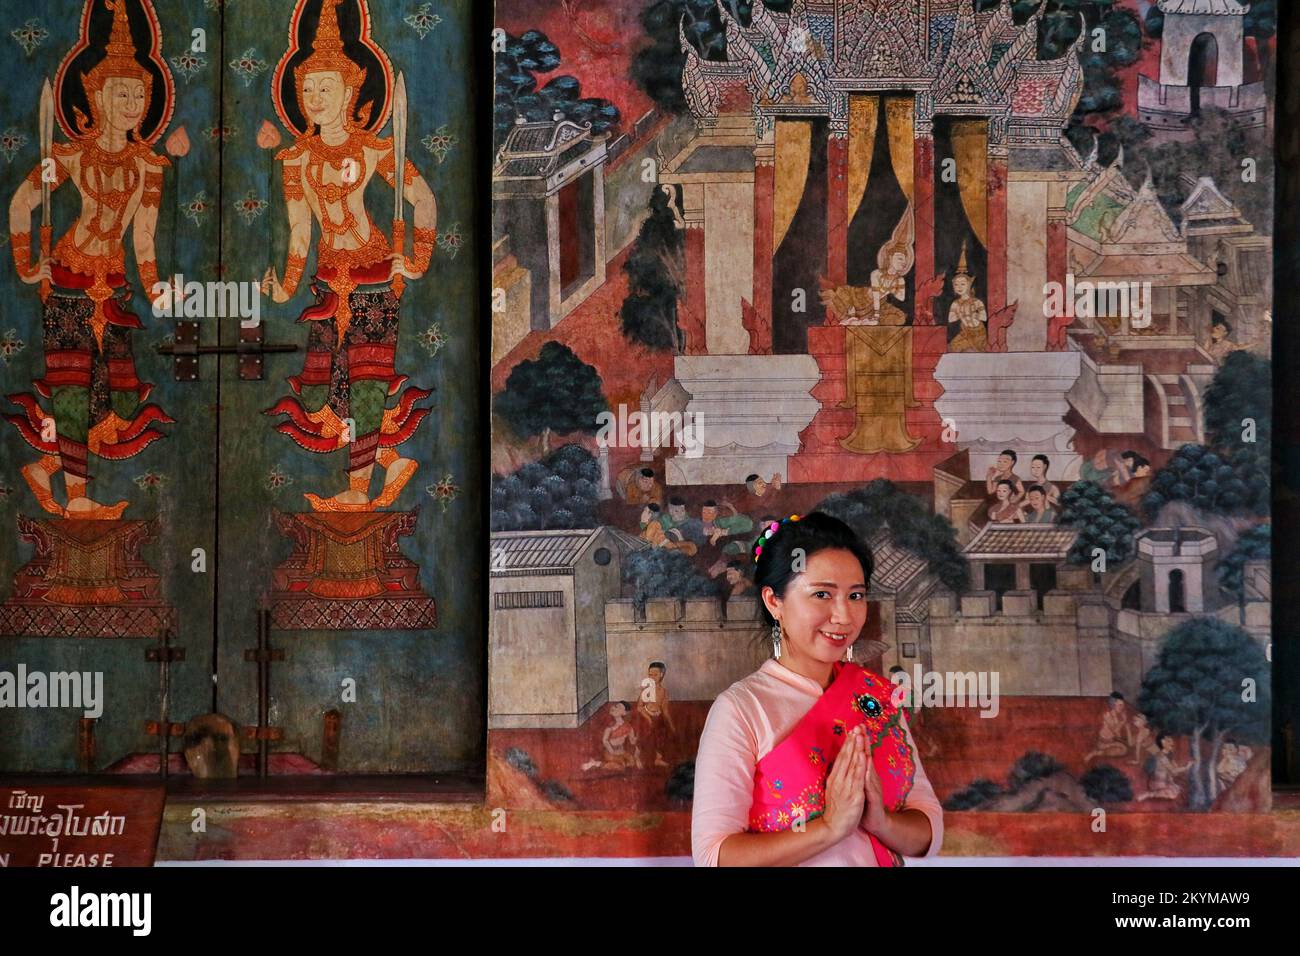 A Thai lady in Mon costume smiles and put hands together in salute at the mural wall of temple Stock Photo